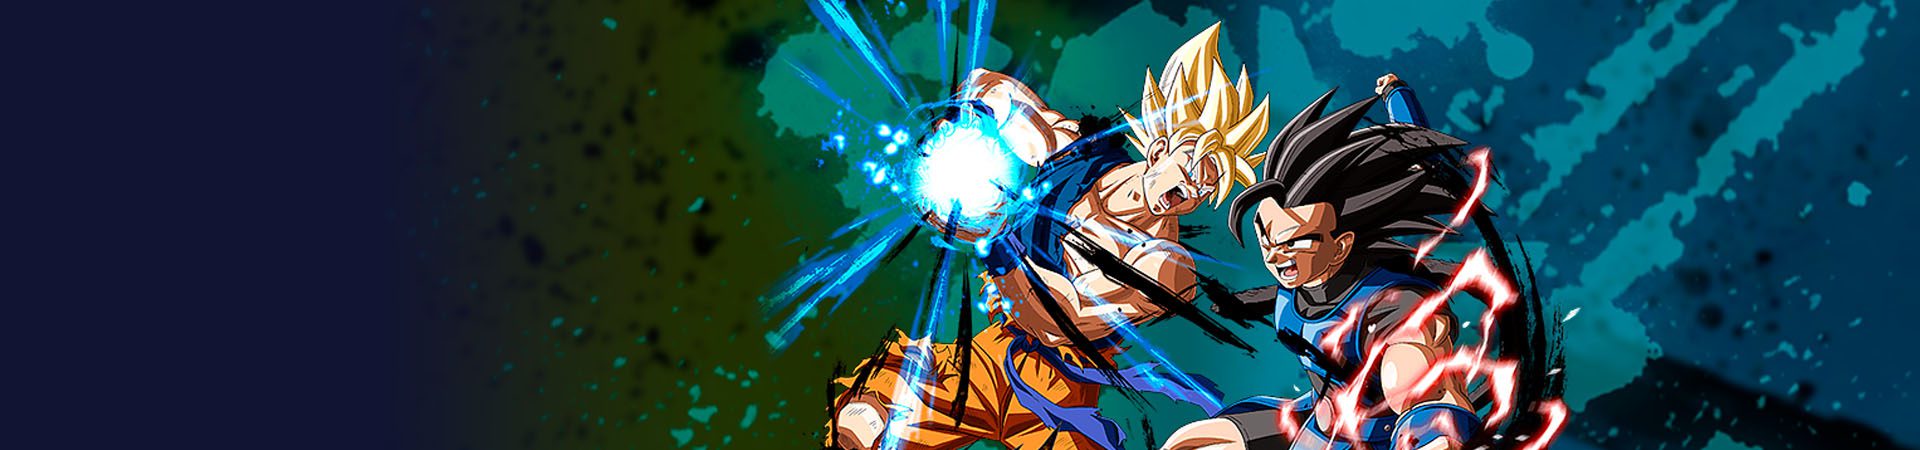 How to play Dragon Ball Legends on PC or Mac? banner